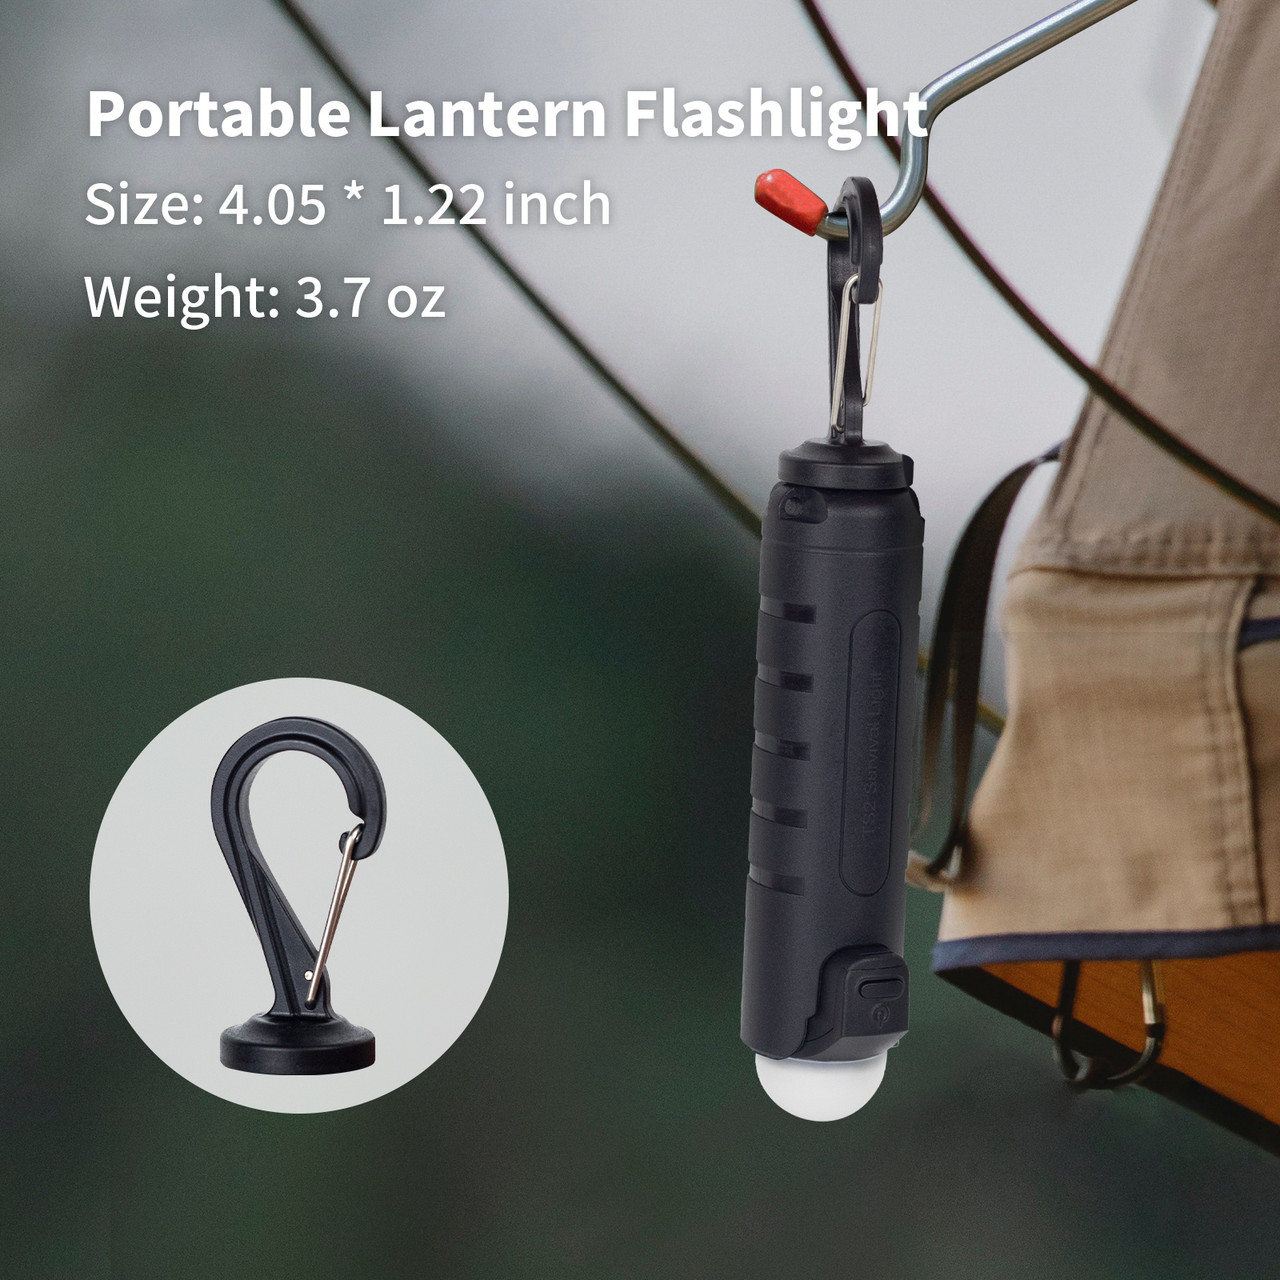 Thrunite TS2 Survival Light: Emergency Light + Battery & Cords for Charging  Gear (Save $10 Off) 